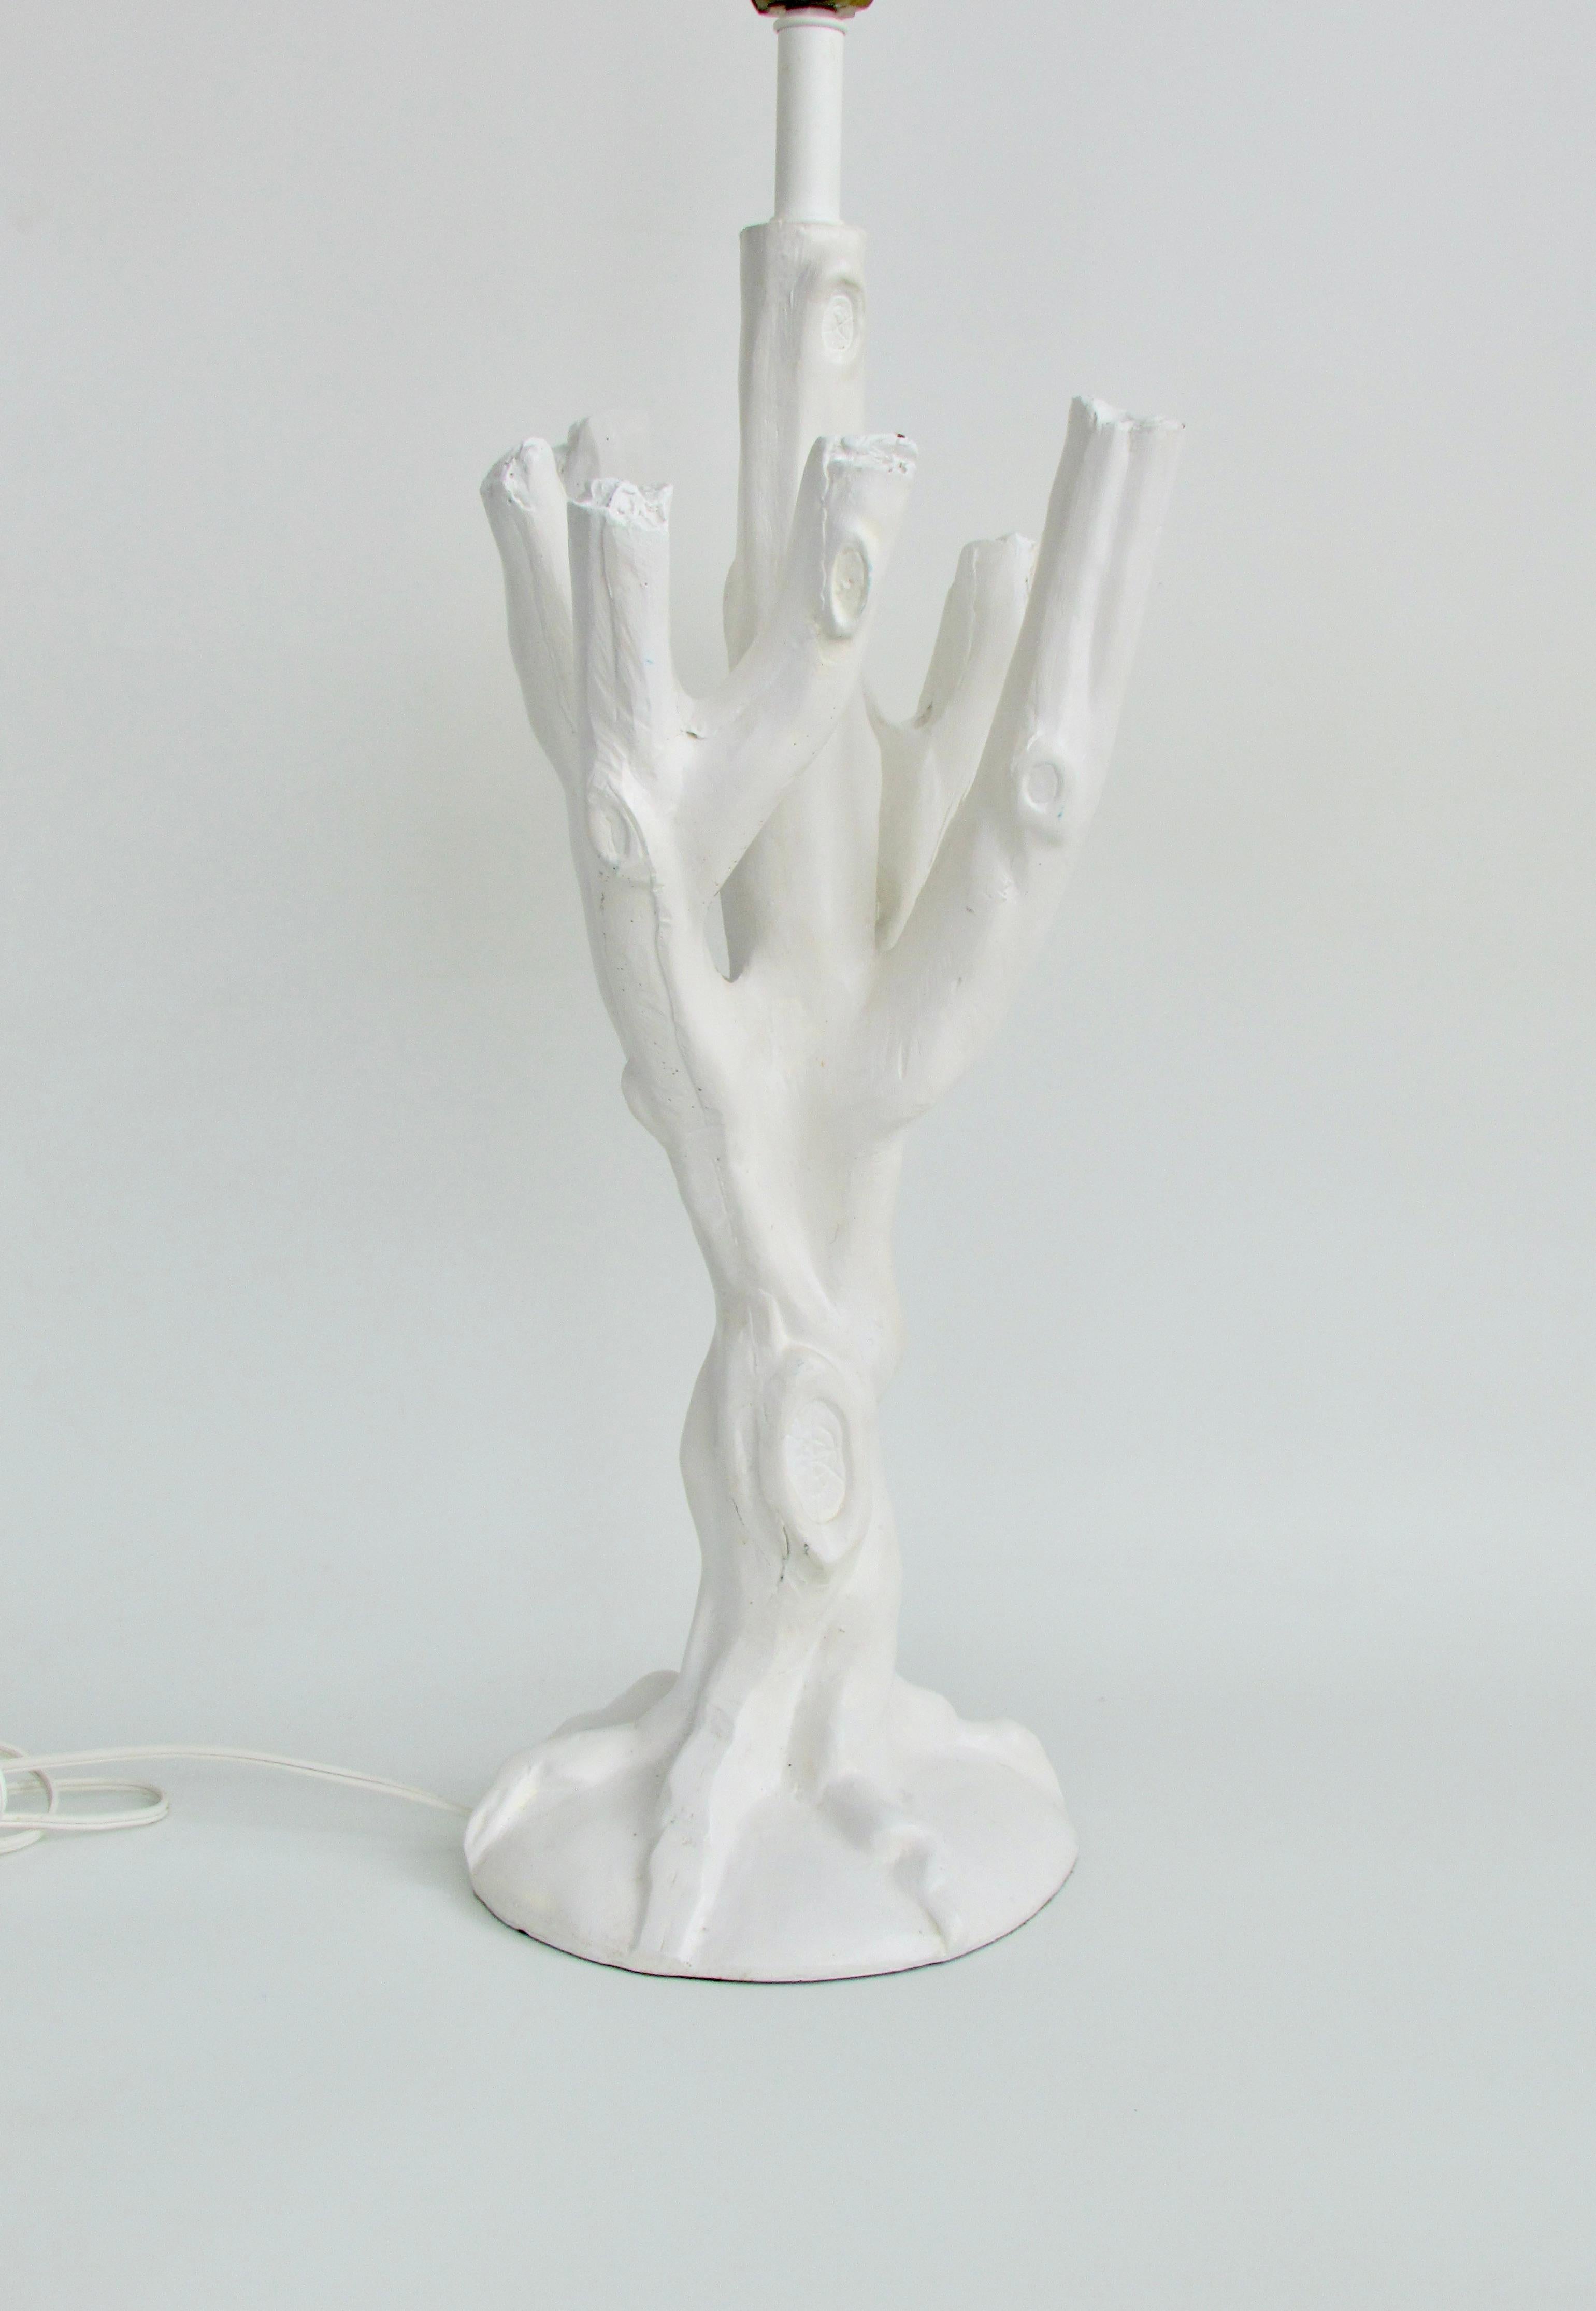 Organic form of tree branch in white finish . Very much in the style of John Dickinson . 10